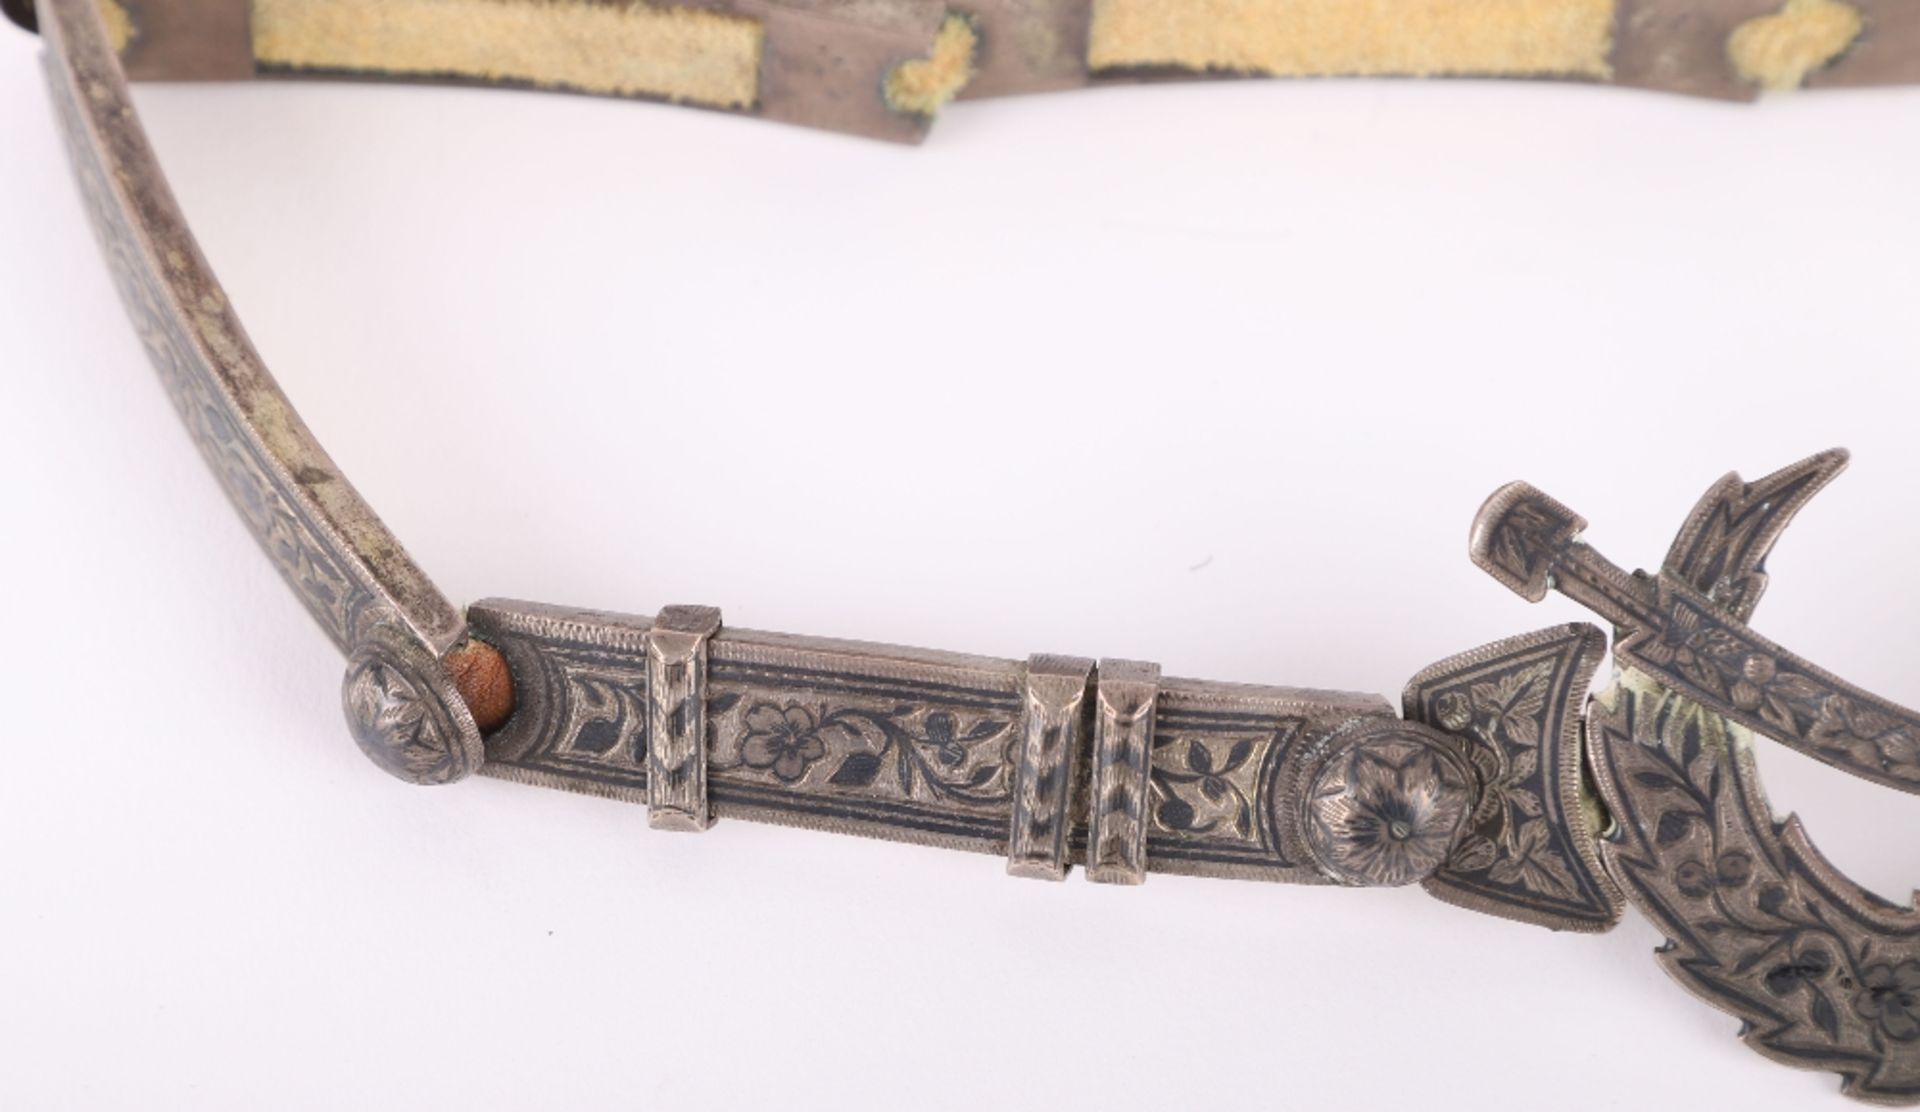 Fine Quality Late 19th Century / Early 20th Century Russian Kinjal Belt - Image 4 of 8